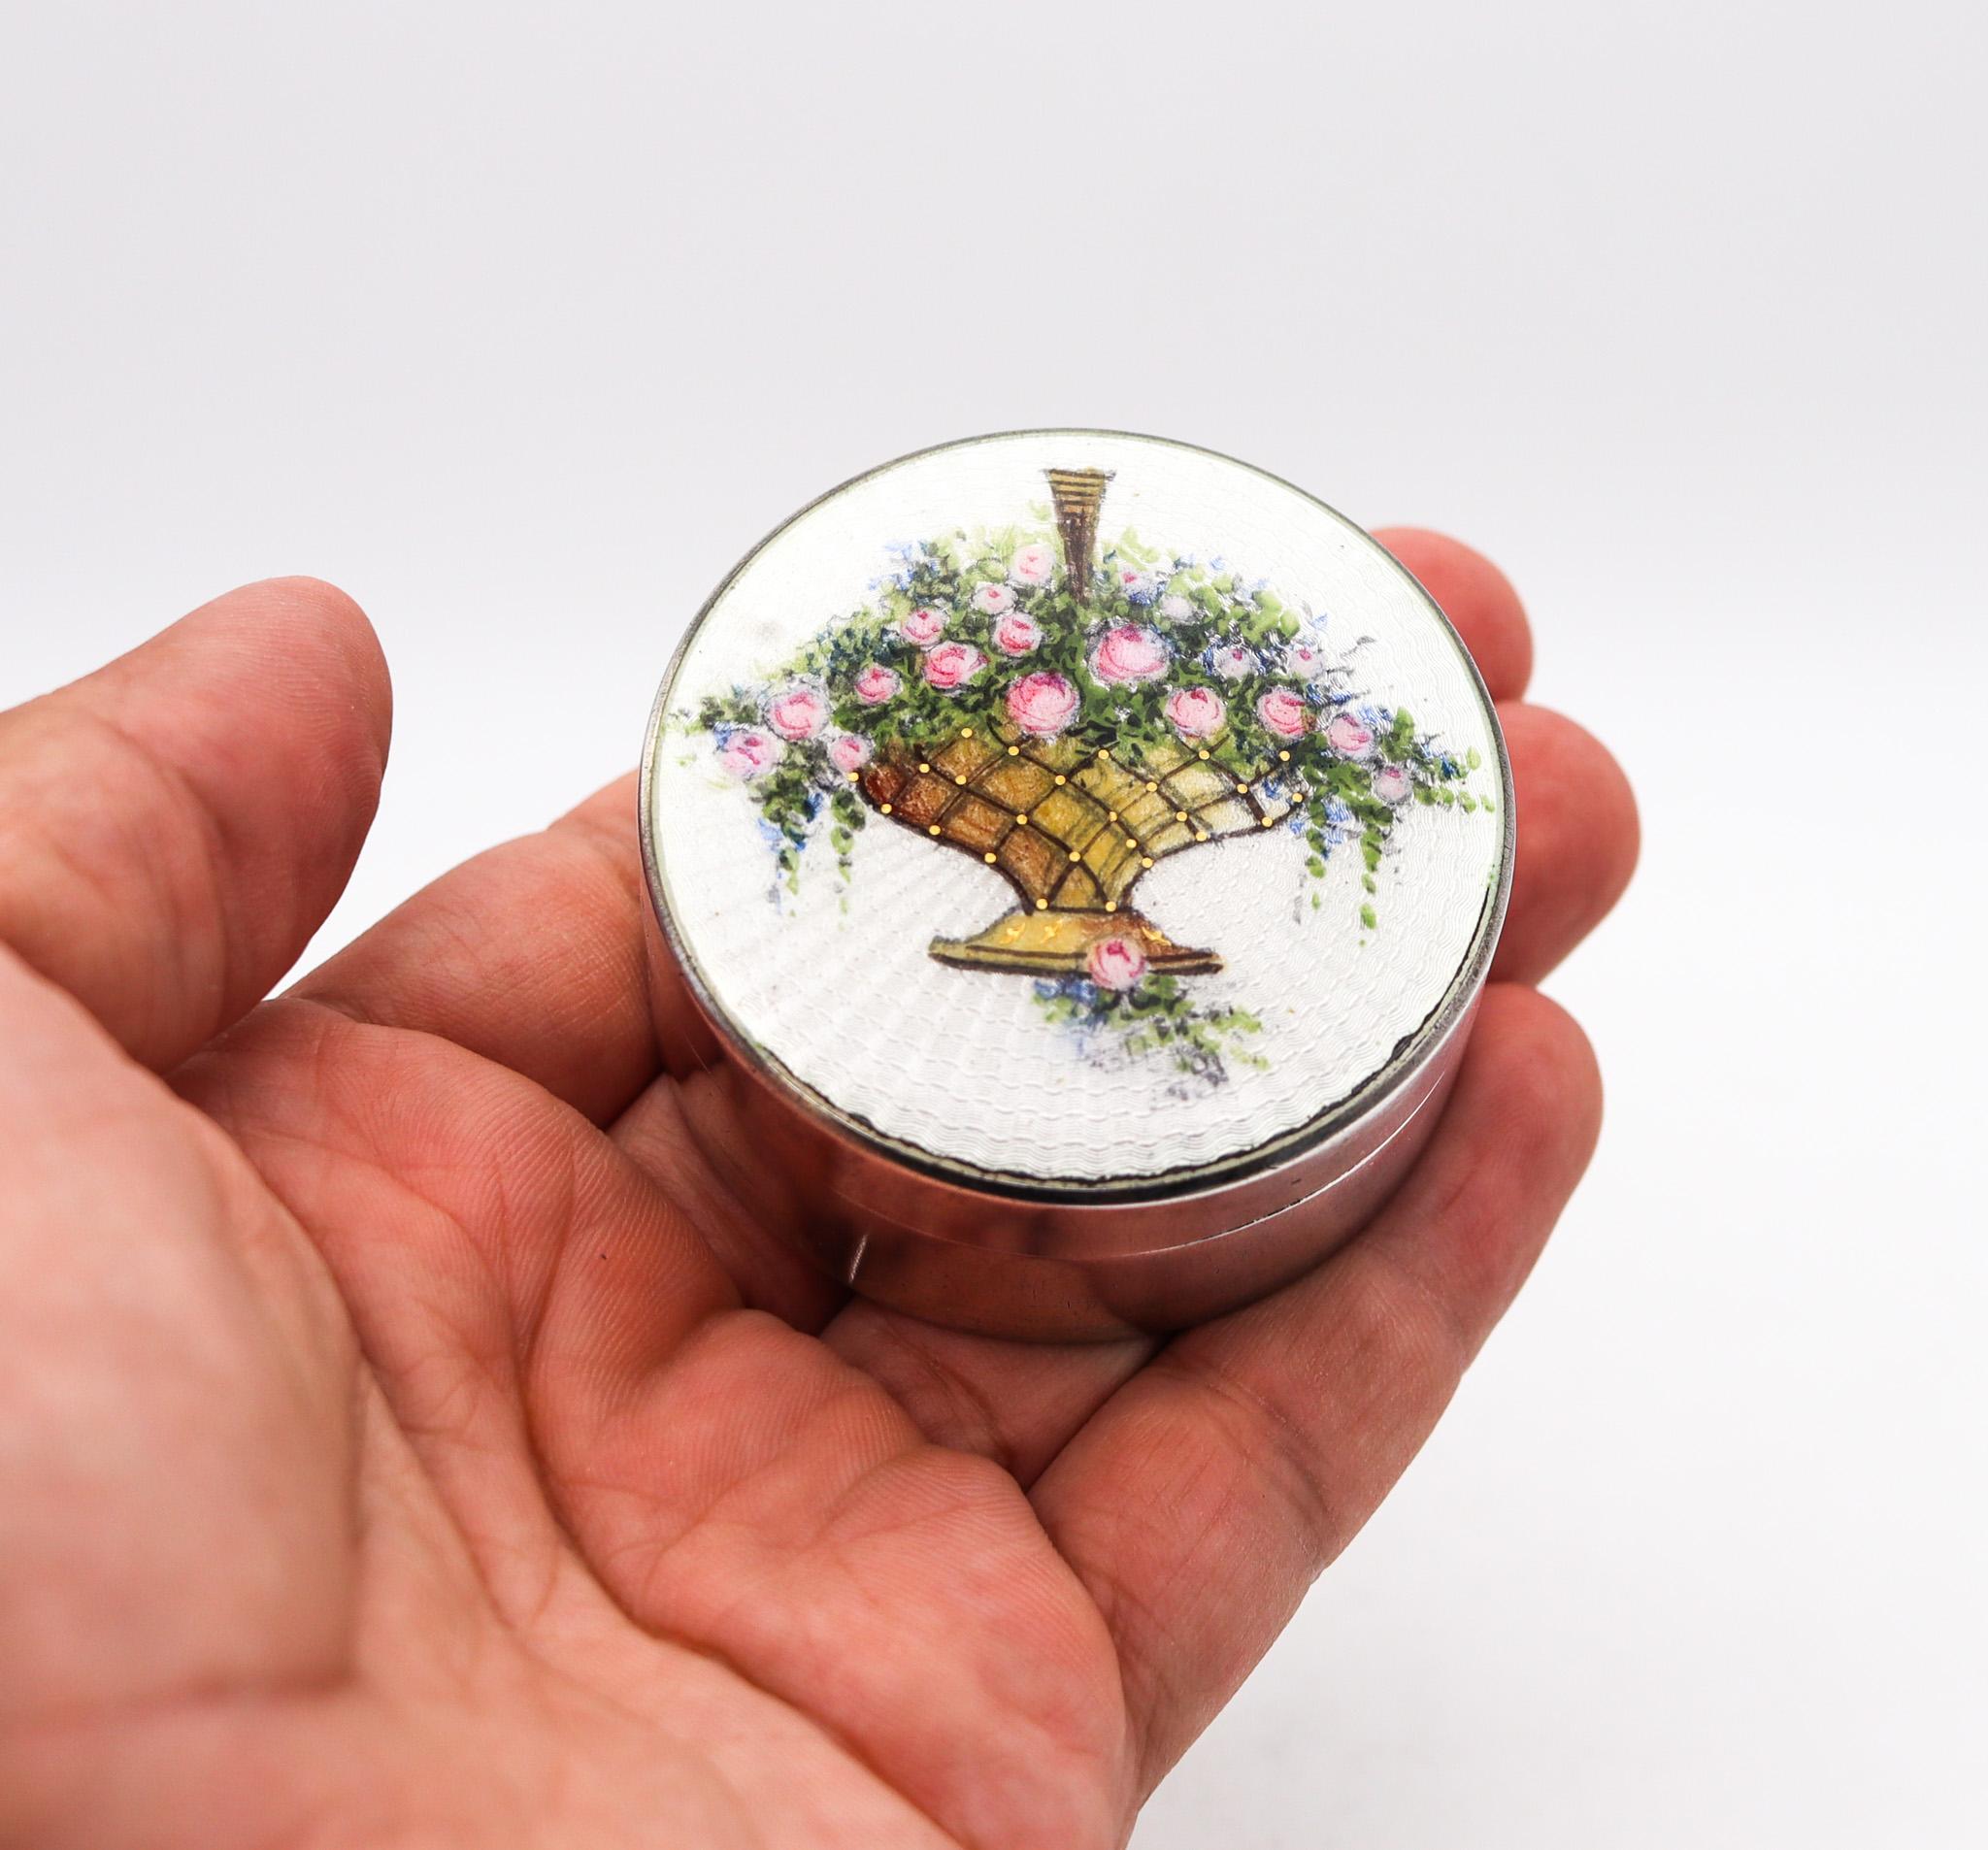 R. Blackinton 1910 Edwardian Enameled Round Box In .925 Sterling Silver For Sale 2